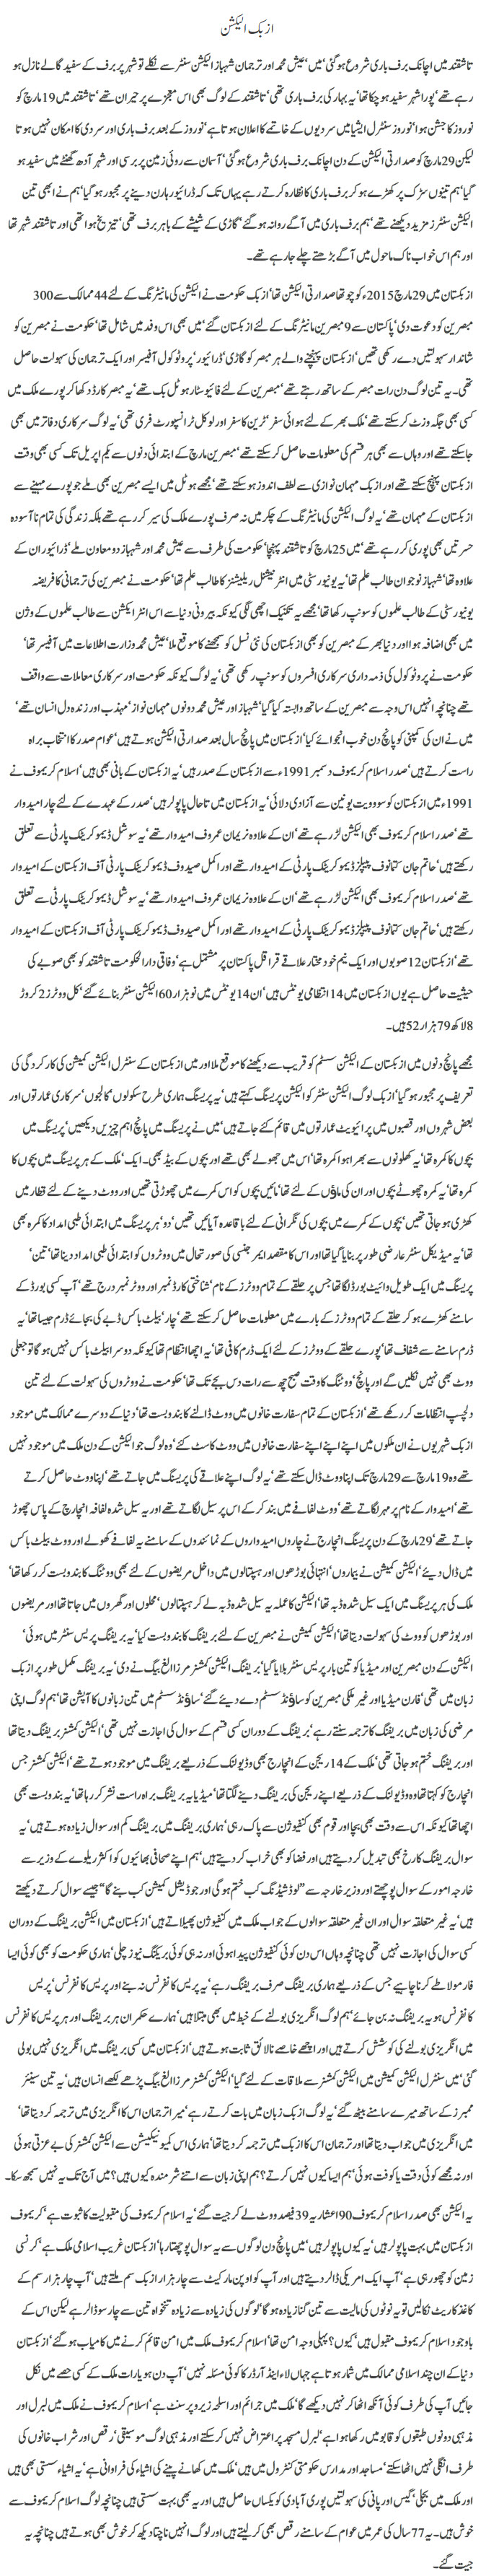 Uzbak Election by Javed Chaudhry